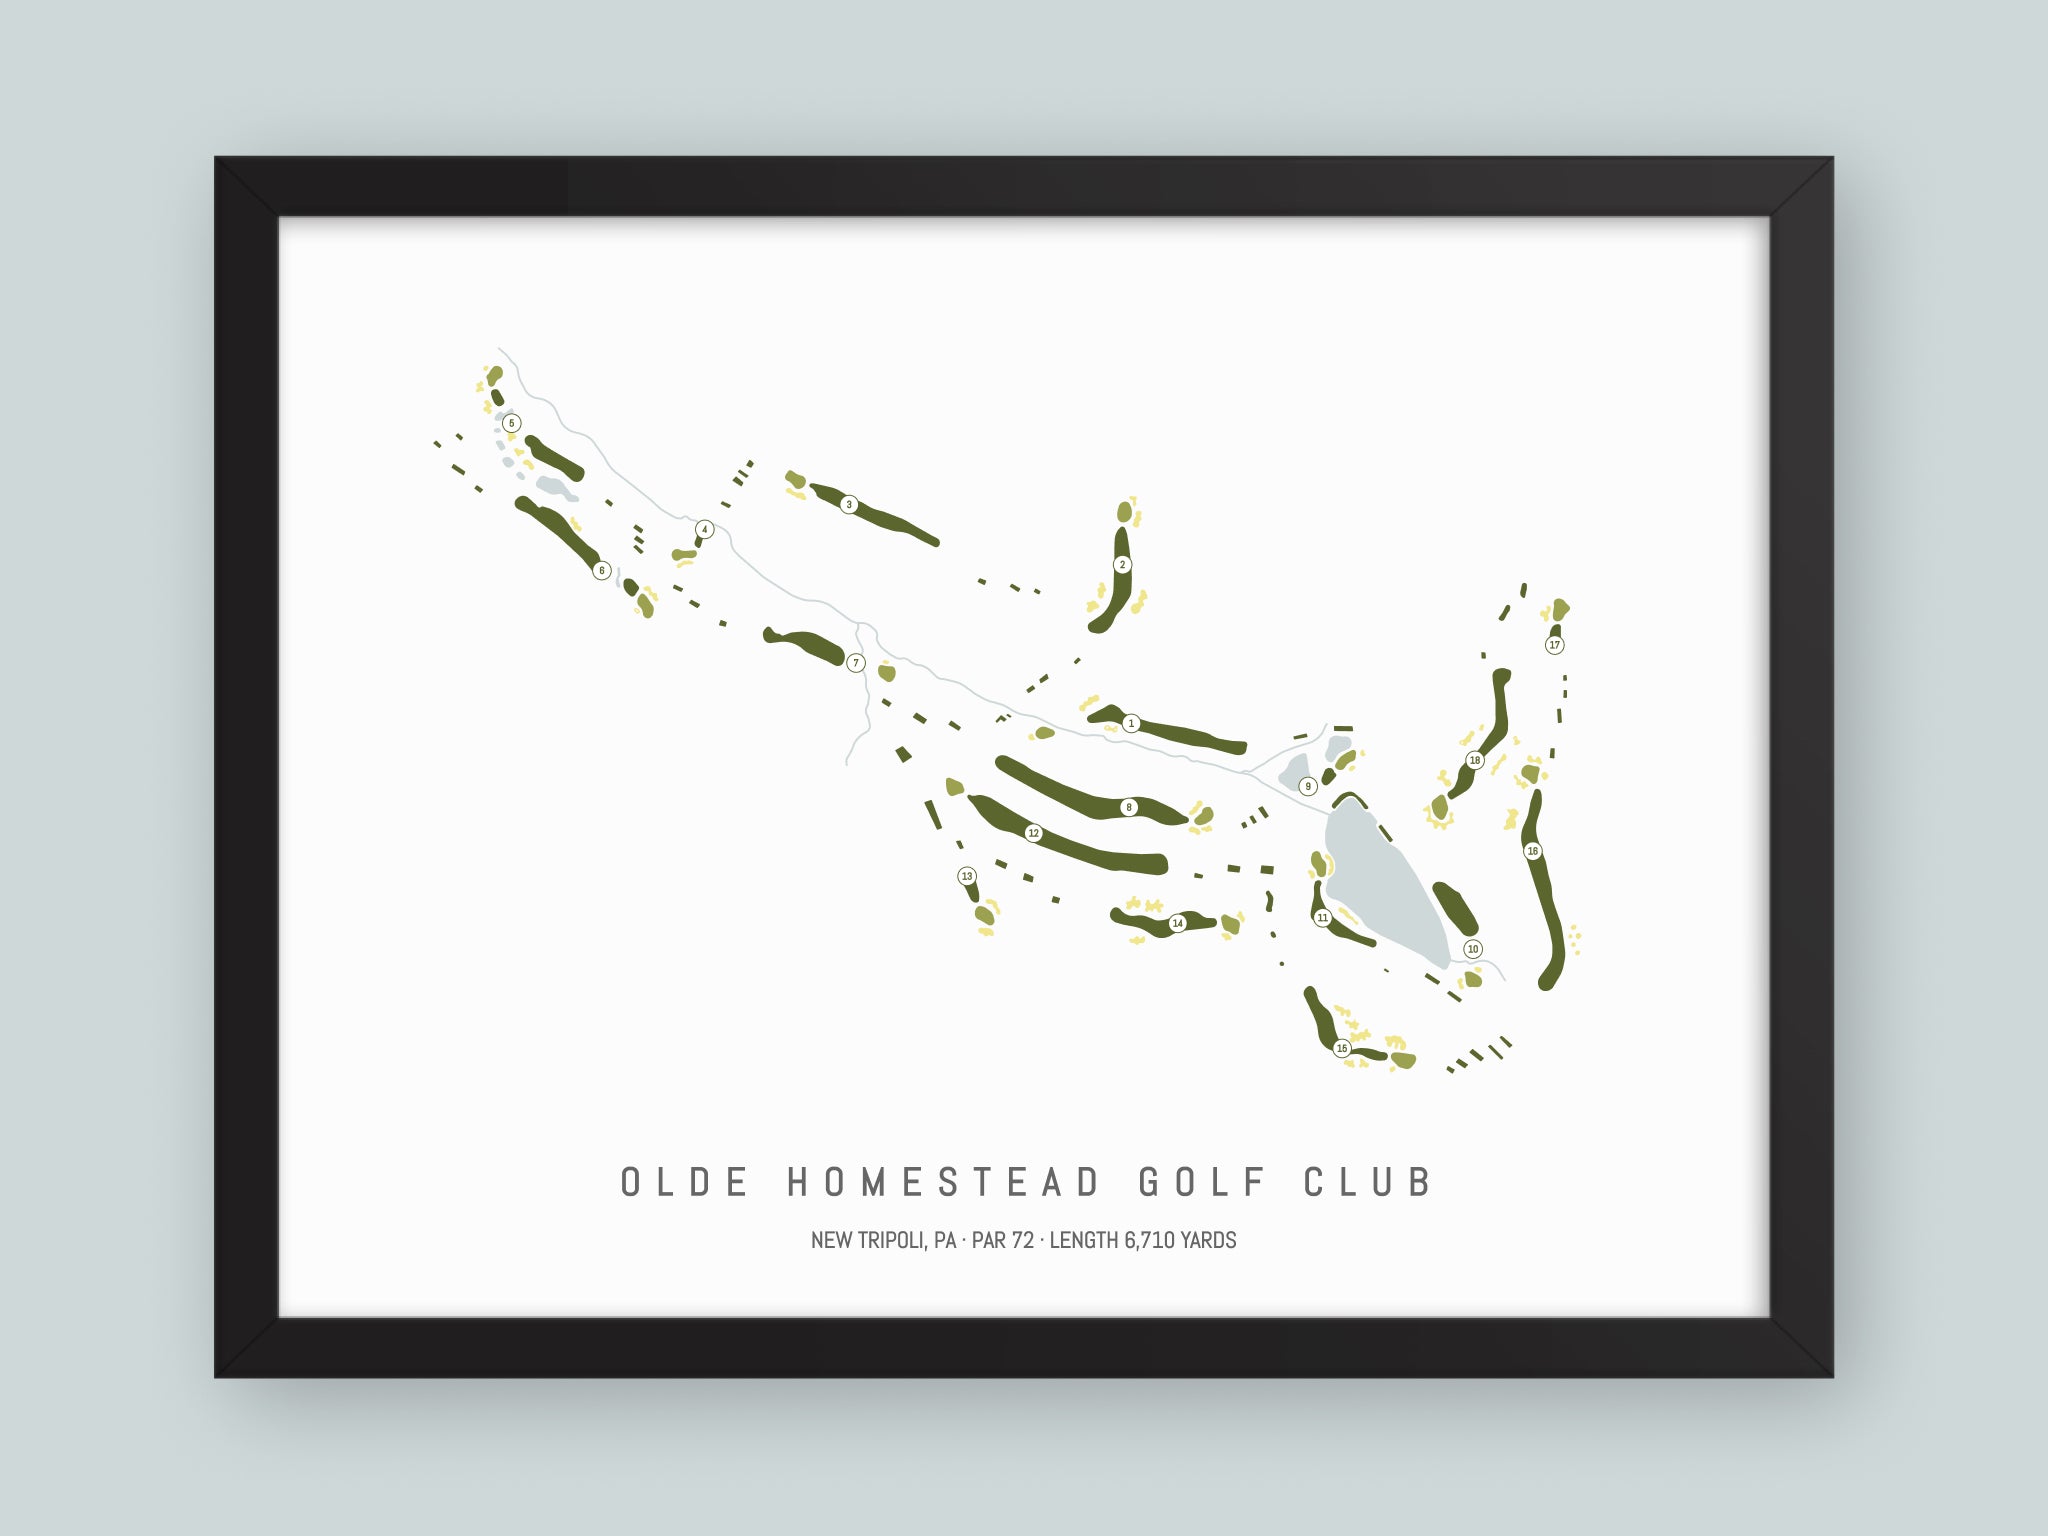 Olde-Homestead-Golf-Club-PA--Black-Frame-24x18-With-Hole-Numbers